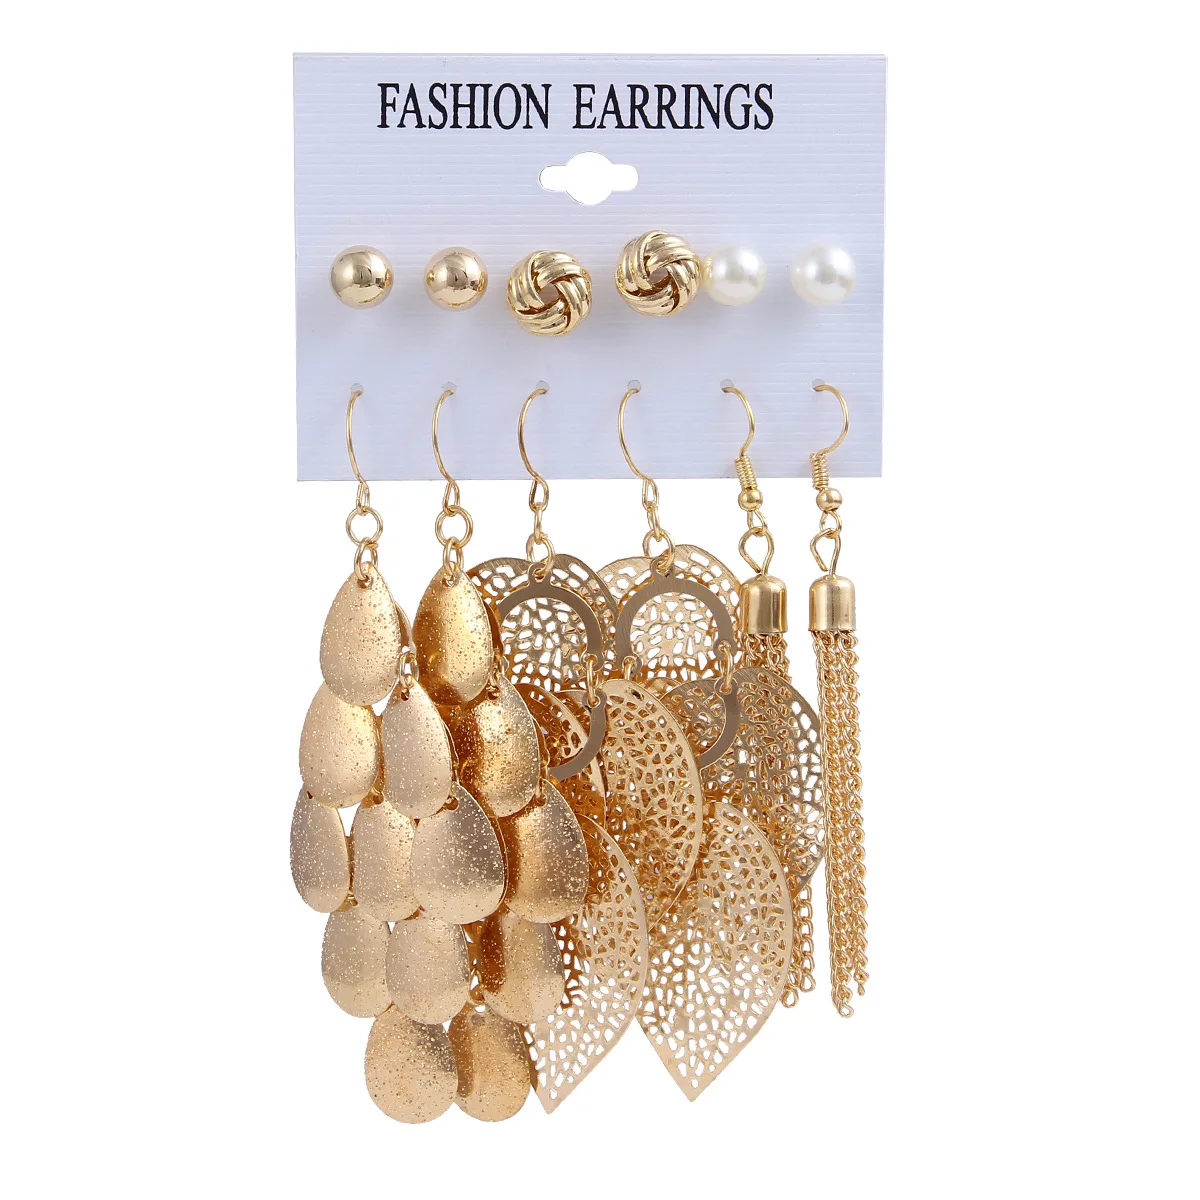 

ZHIYI Vintage 6 Pairs/Lot Gold Plated Small Stud Earrings Women Girls Exaggerated Big Leaf Long Metal Tassel Drop Earring Set, Color plated as shown